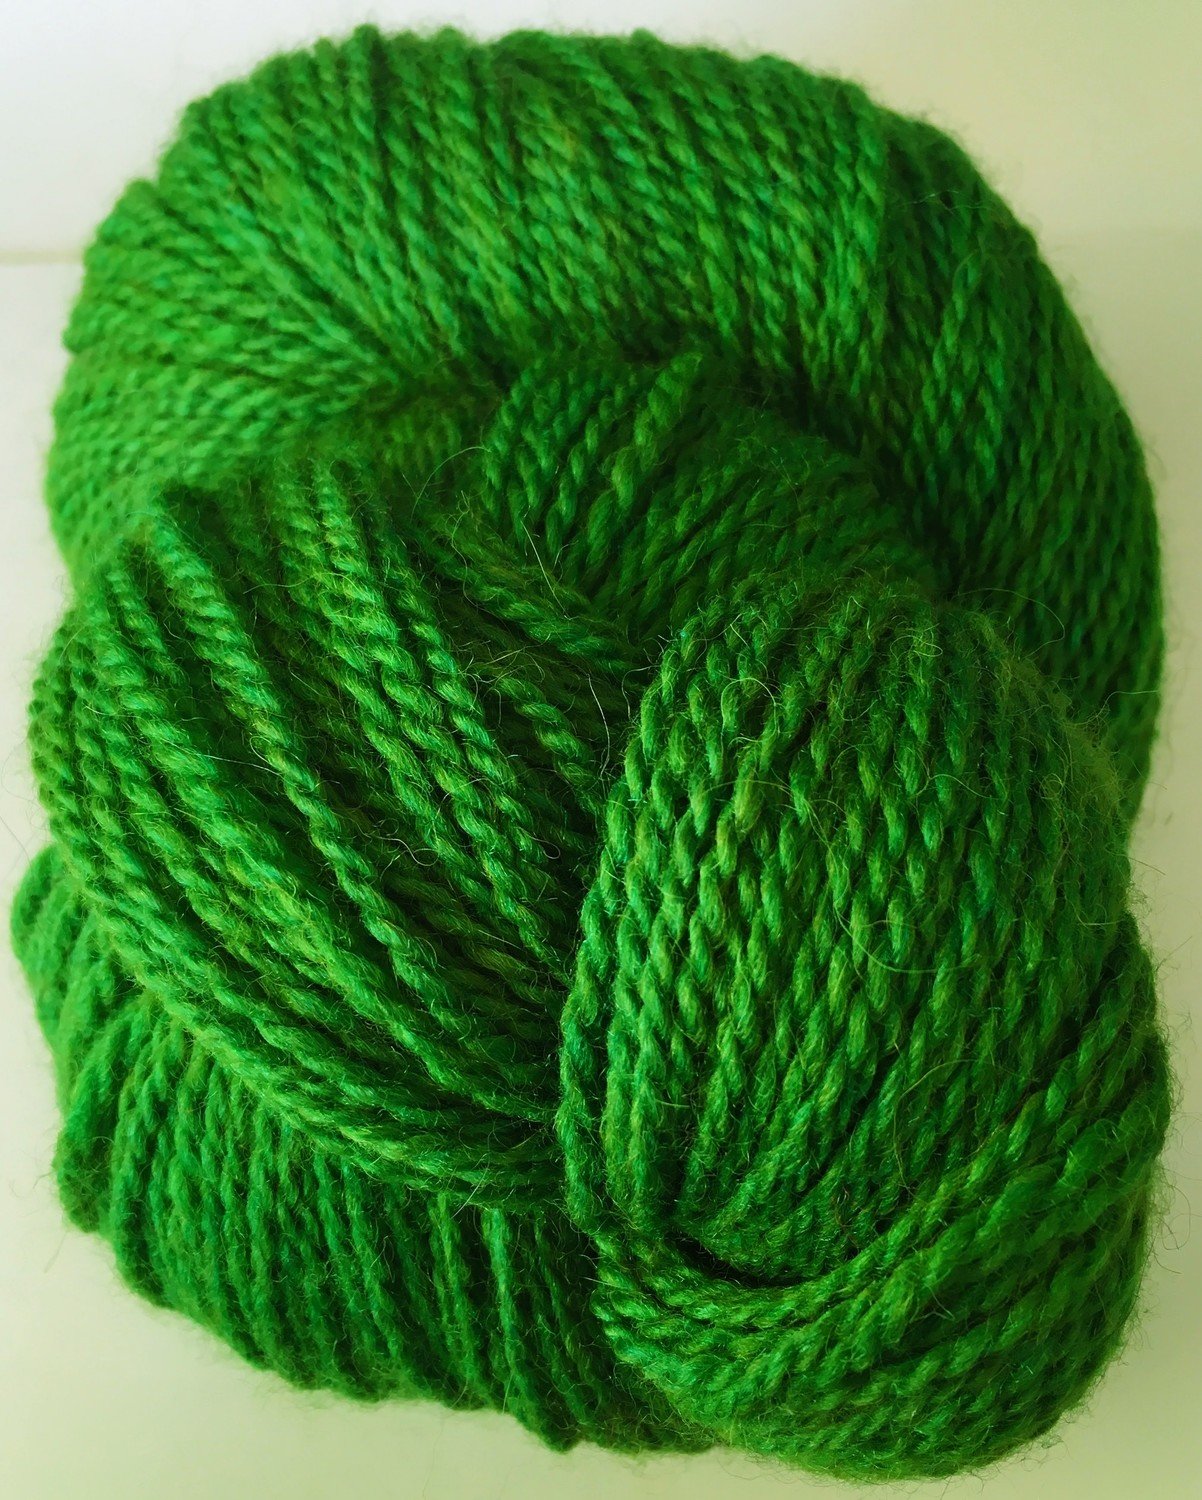 Breezy Hill Cottage-Milled, Hand-Dyed Yarn - Green